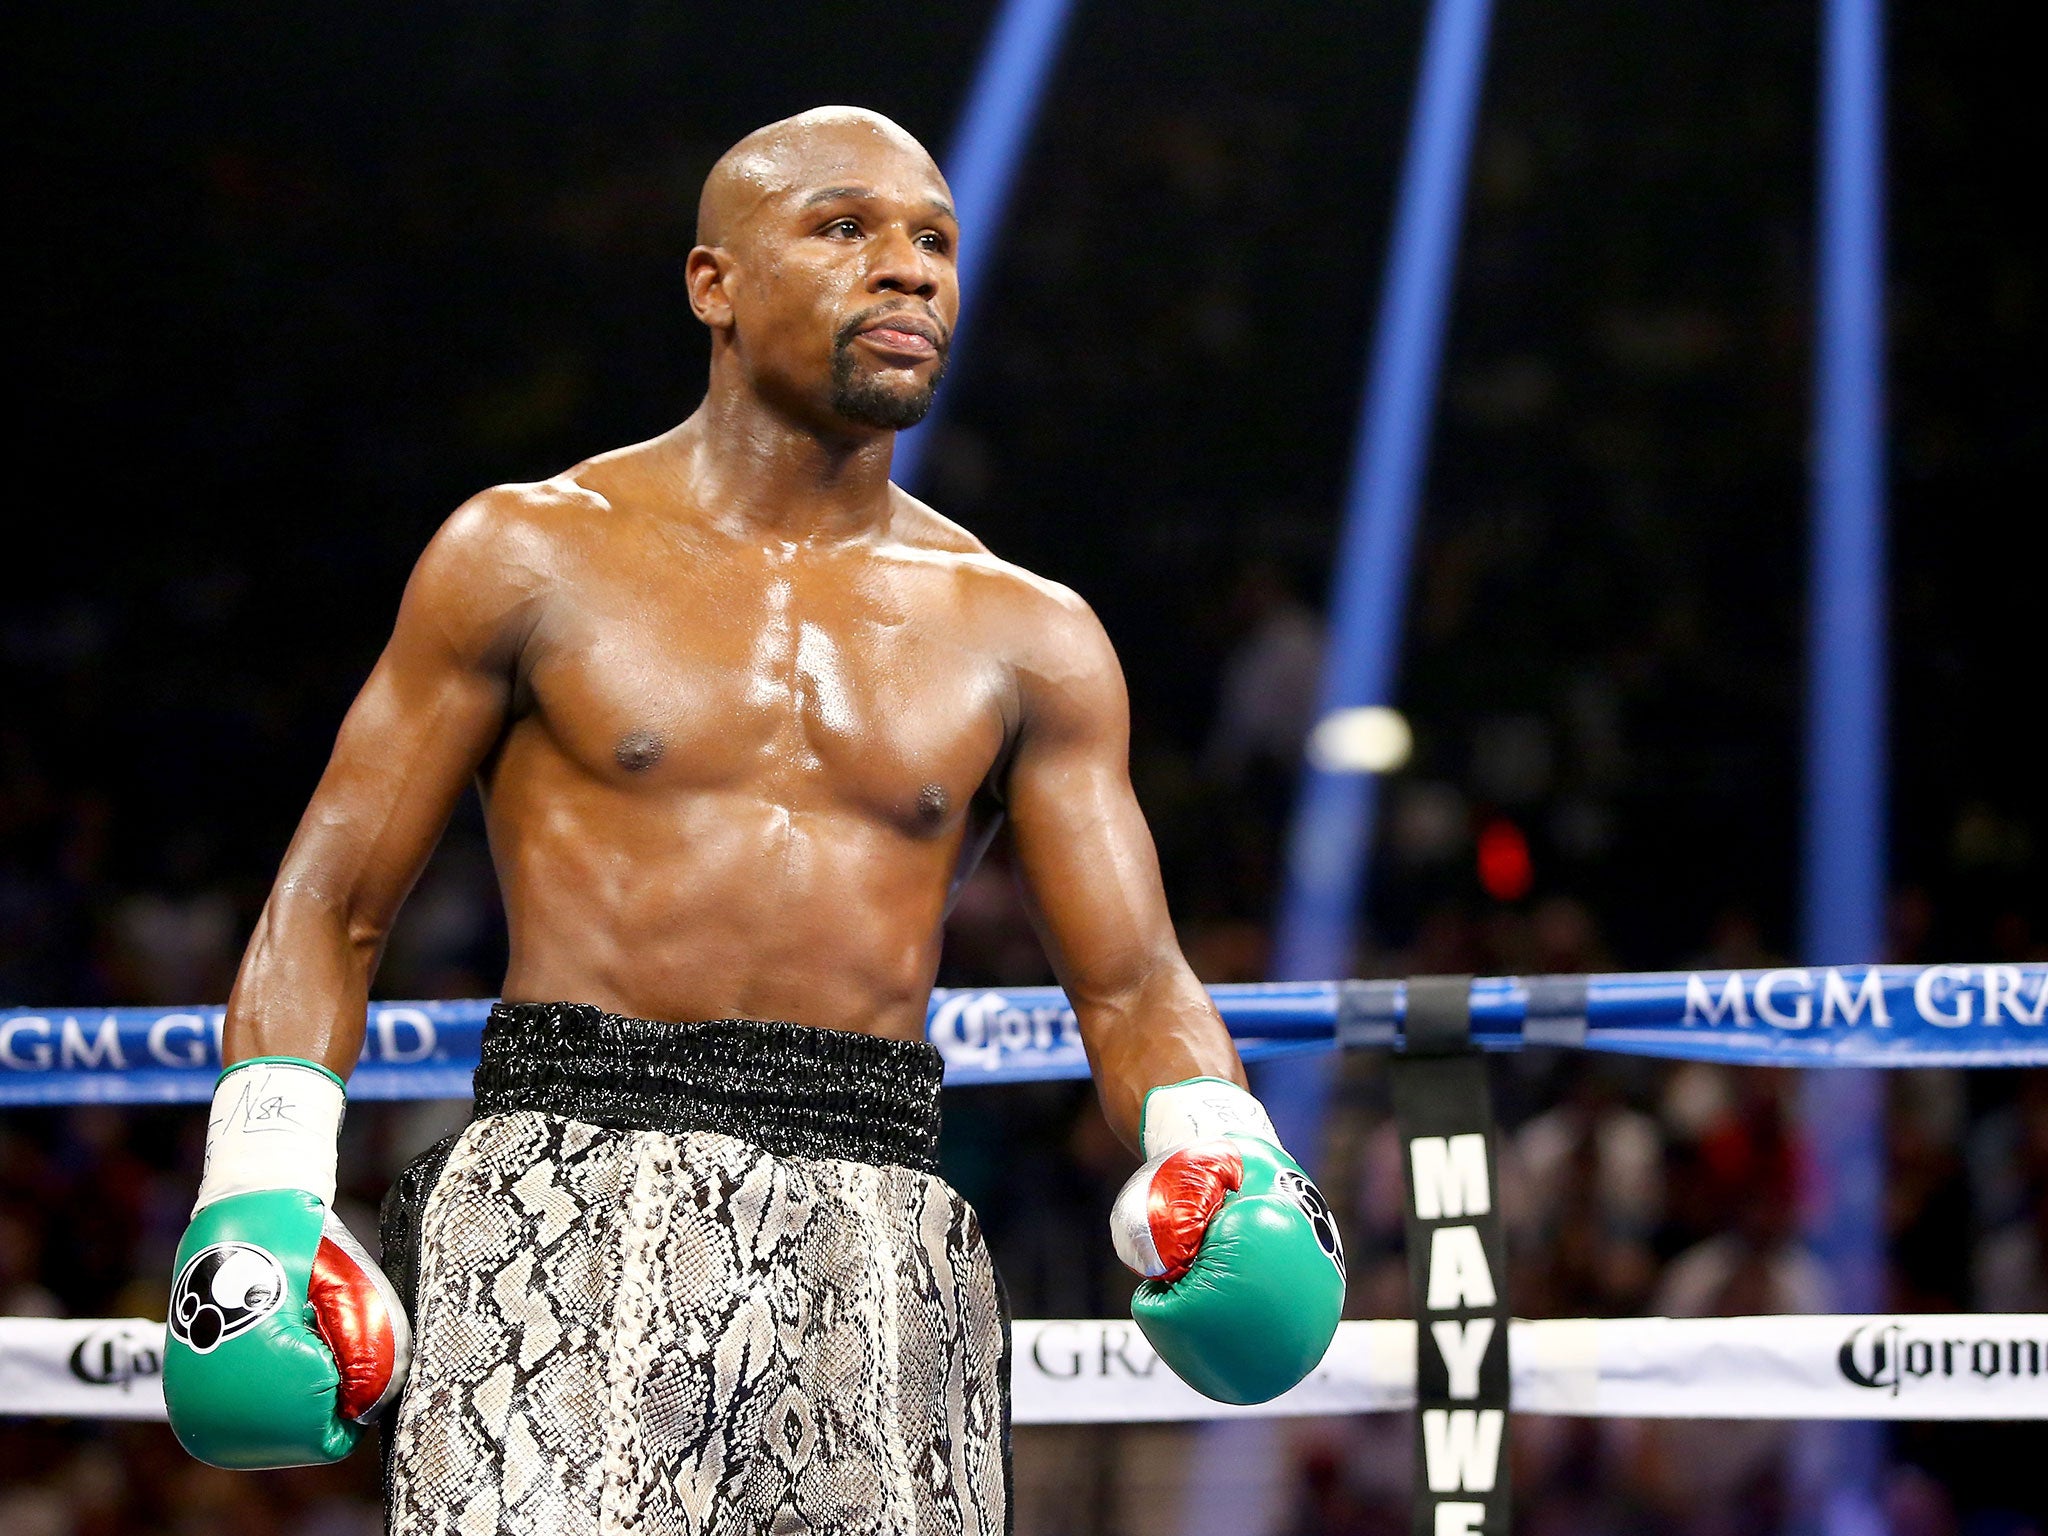 Welterwight boxing champion Floyd Mayweather likes to flash his cash